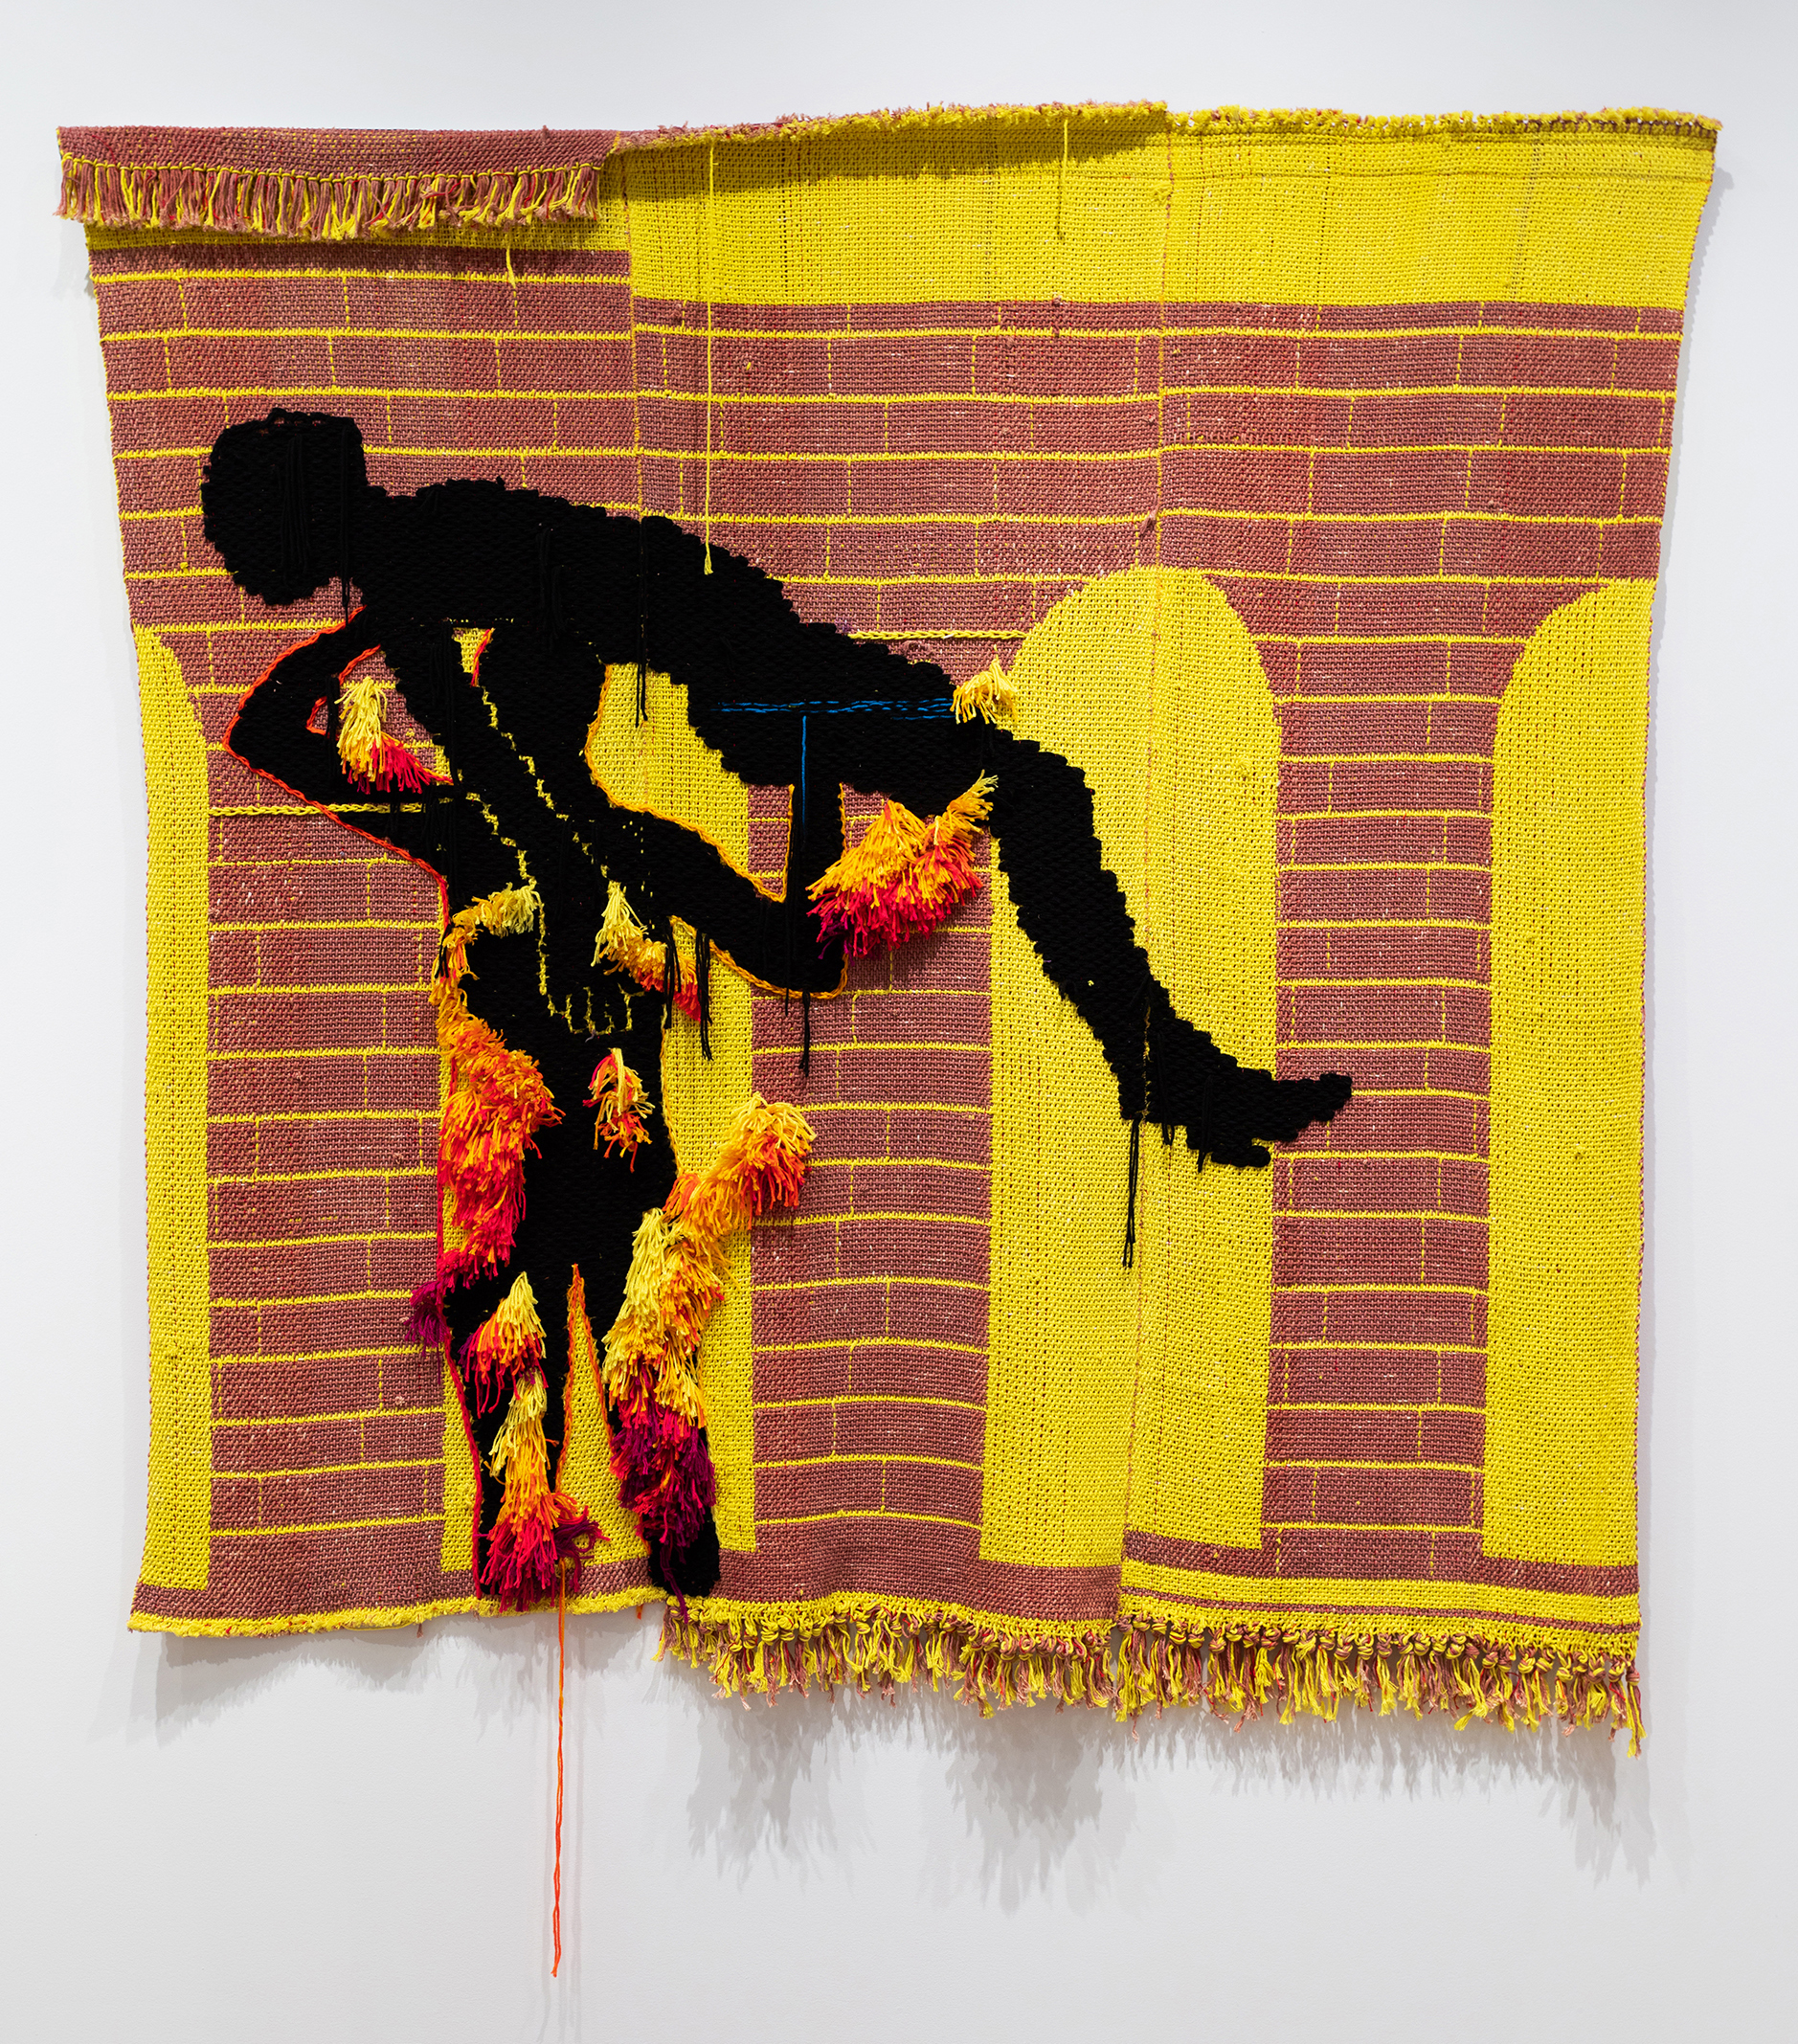 Weaving with an abstract figure holding up another with a brickwork patterned background.